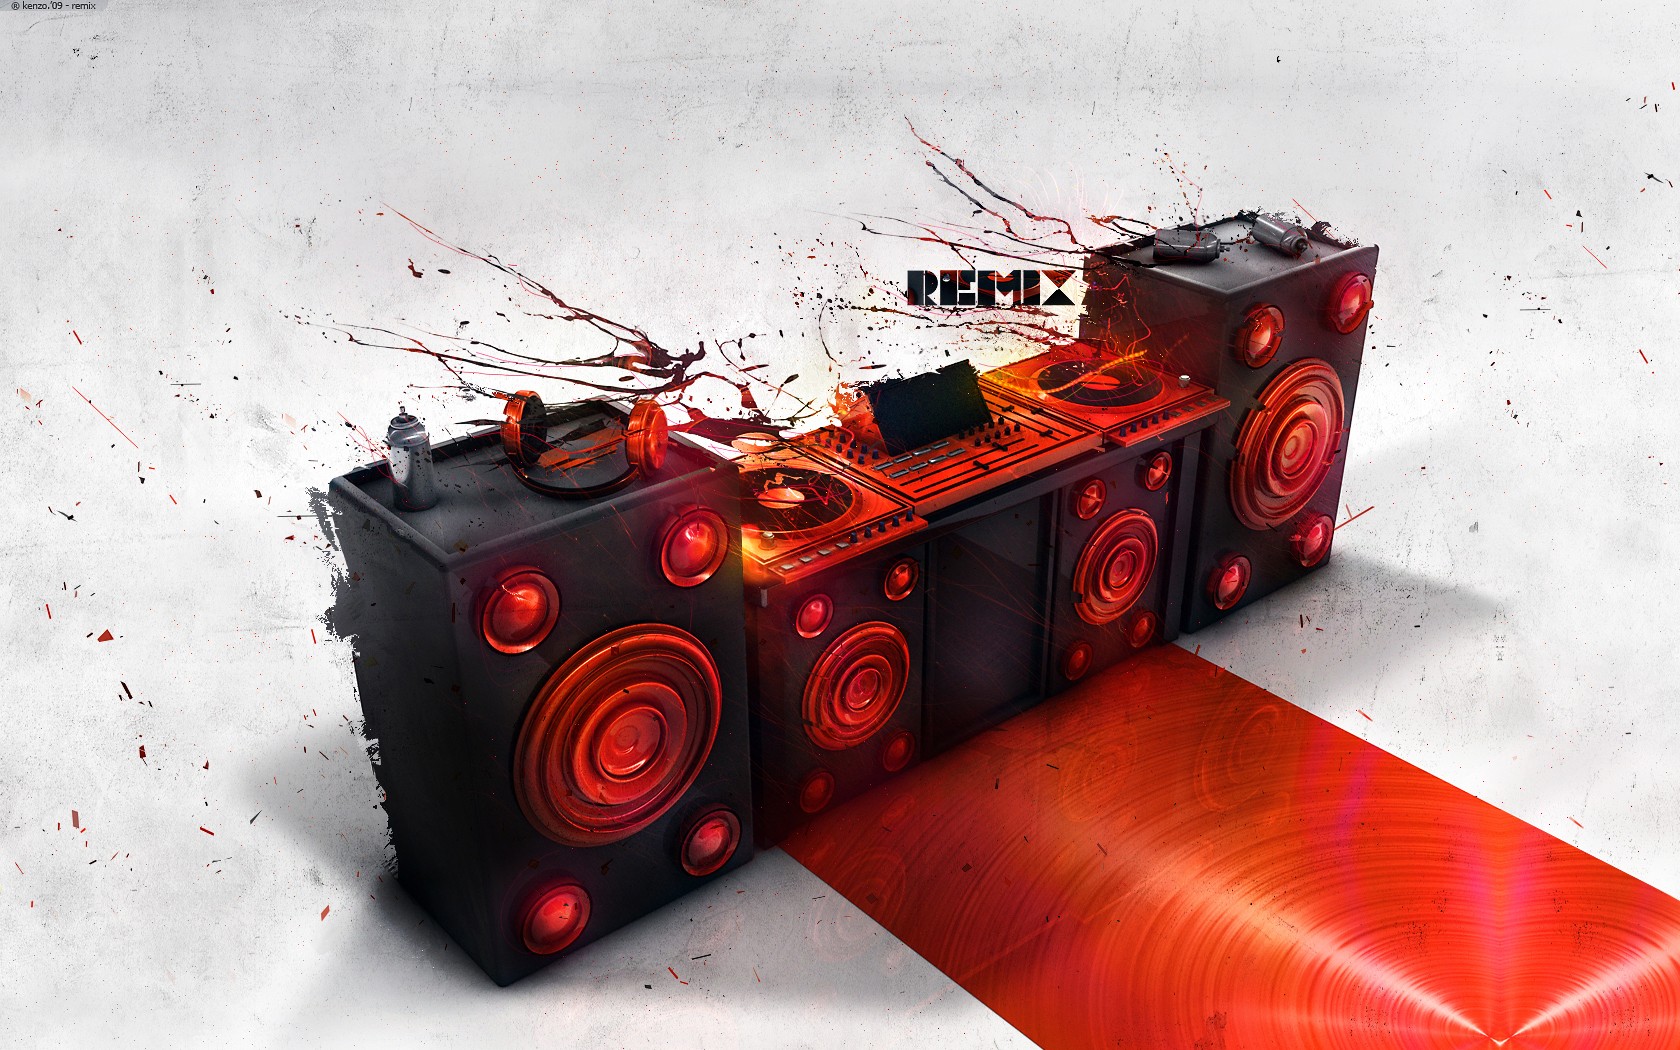 General 1680x1050 digital art music turntables red speakers audio-technica technology